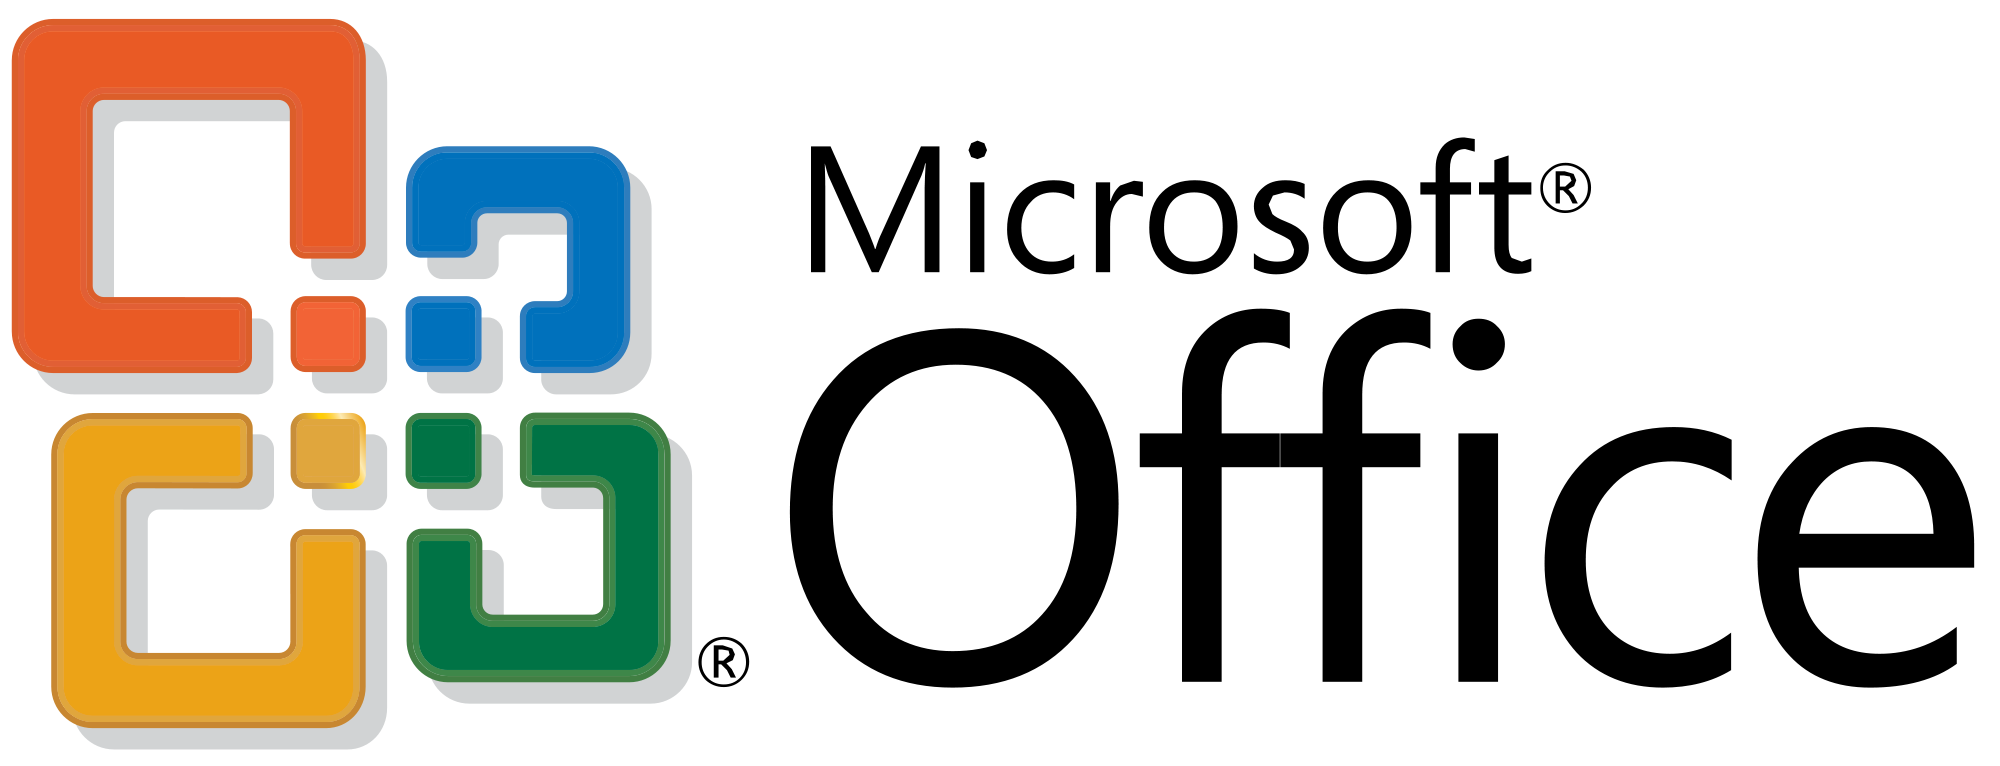 Microsoft Logo PNG Picture - 